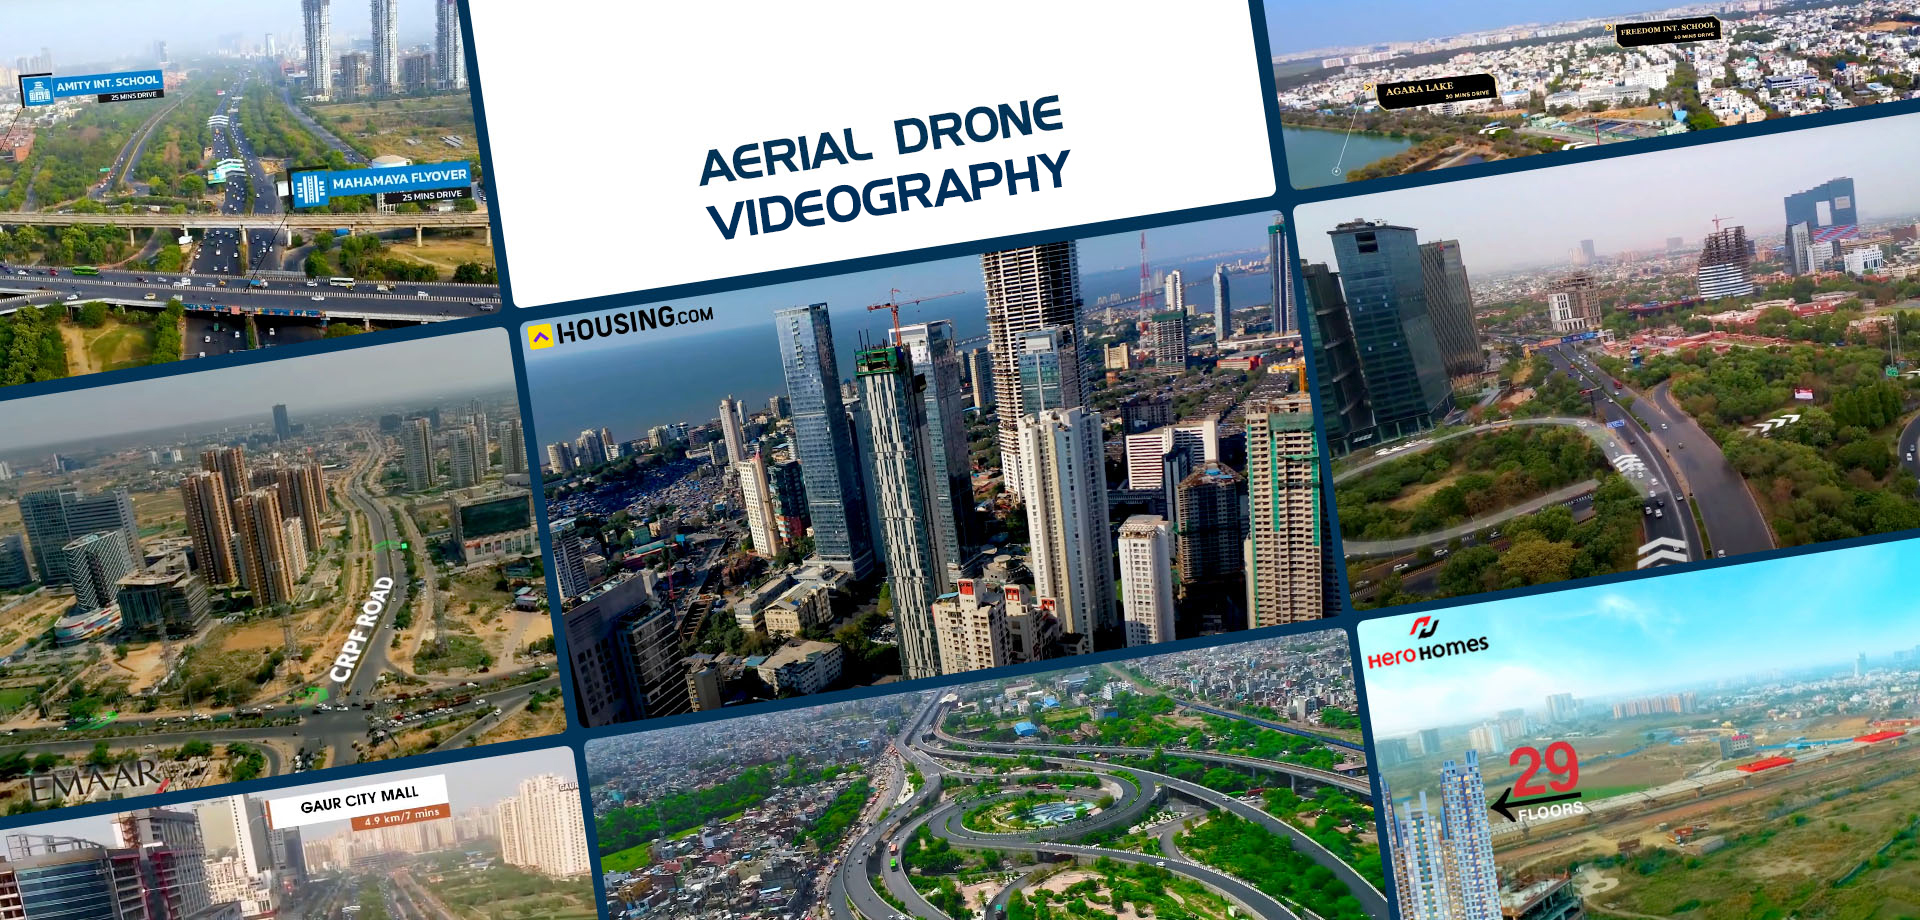 Aerial drone videography